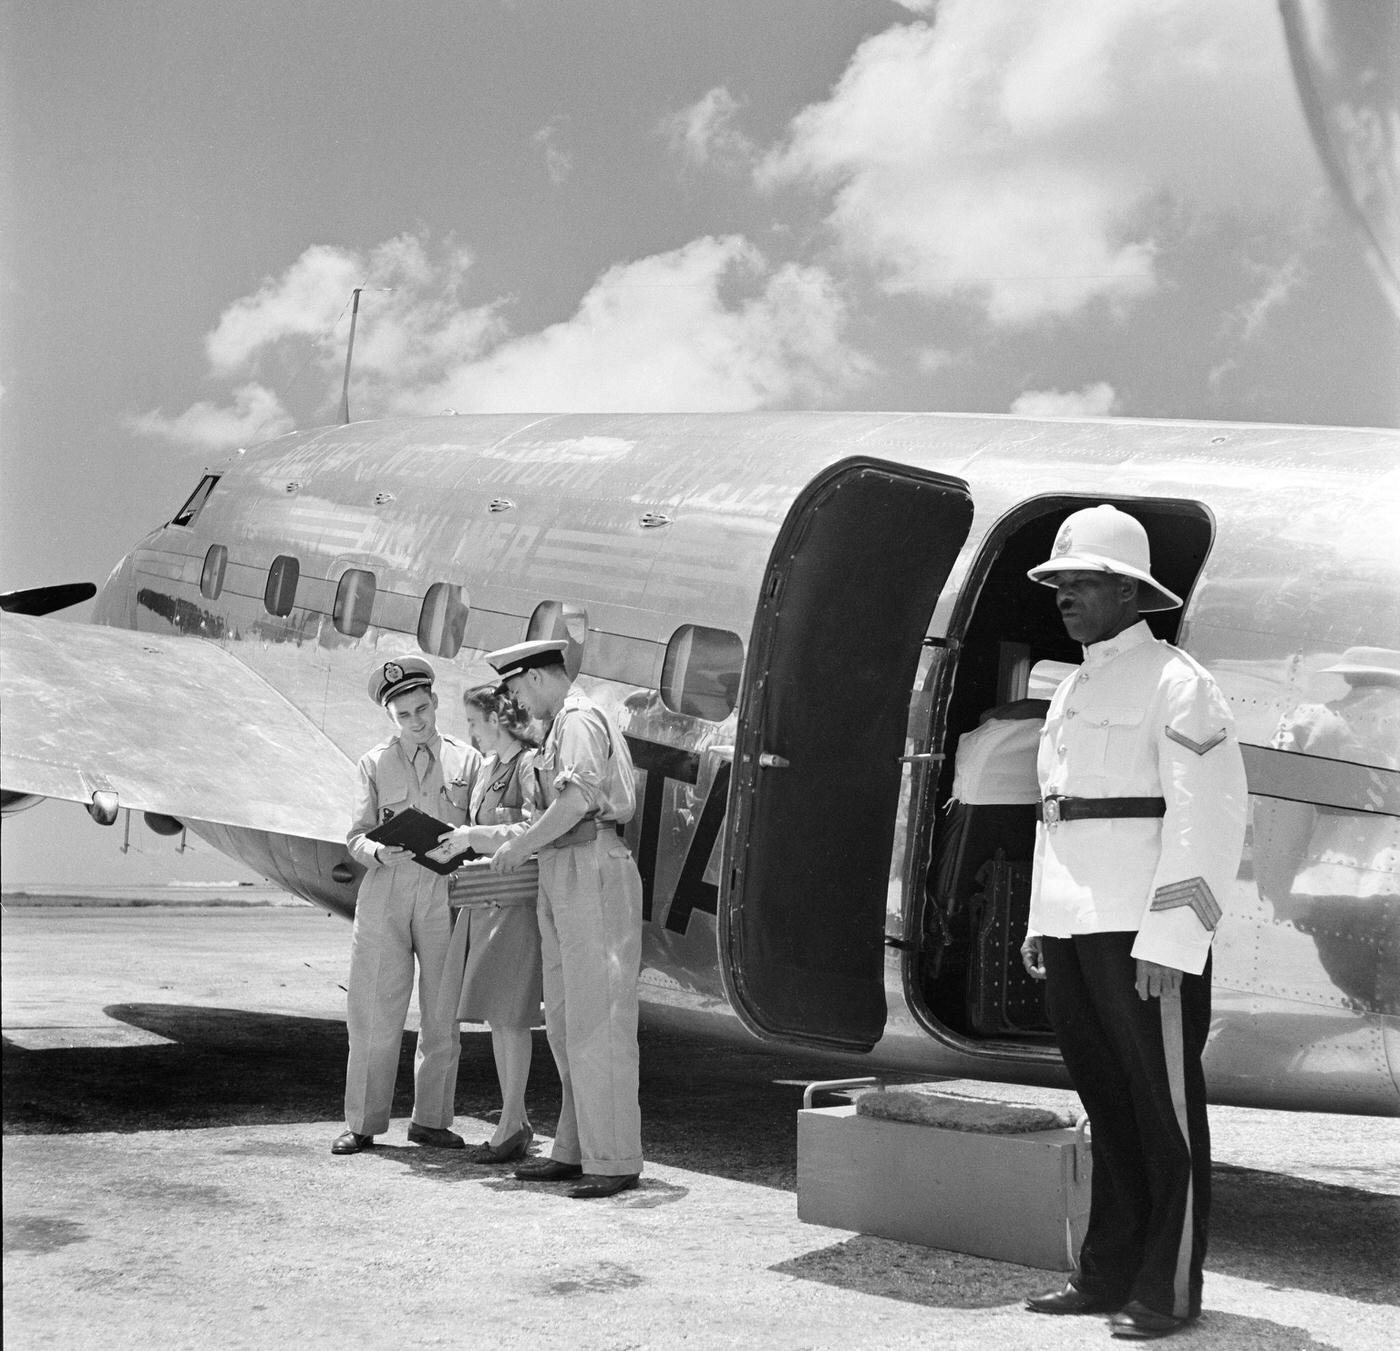 The flight crew reviews the passenger list of a British West Indian Airlines plane at Piarco International Airport in Piarco, Trinidad, British West Indies, in 1952.